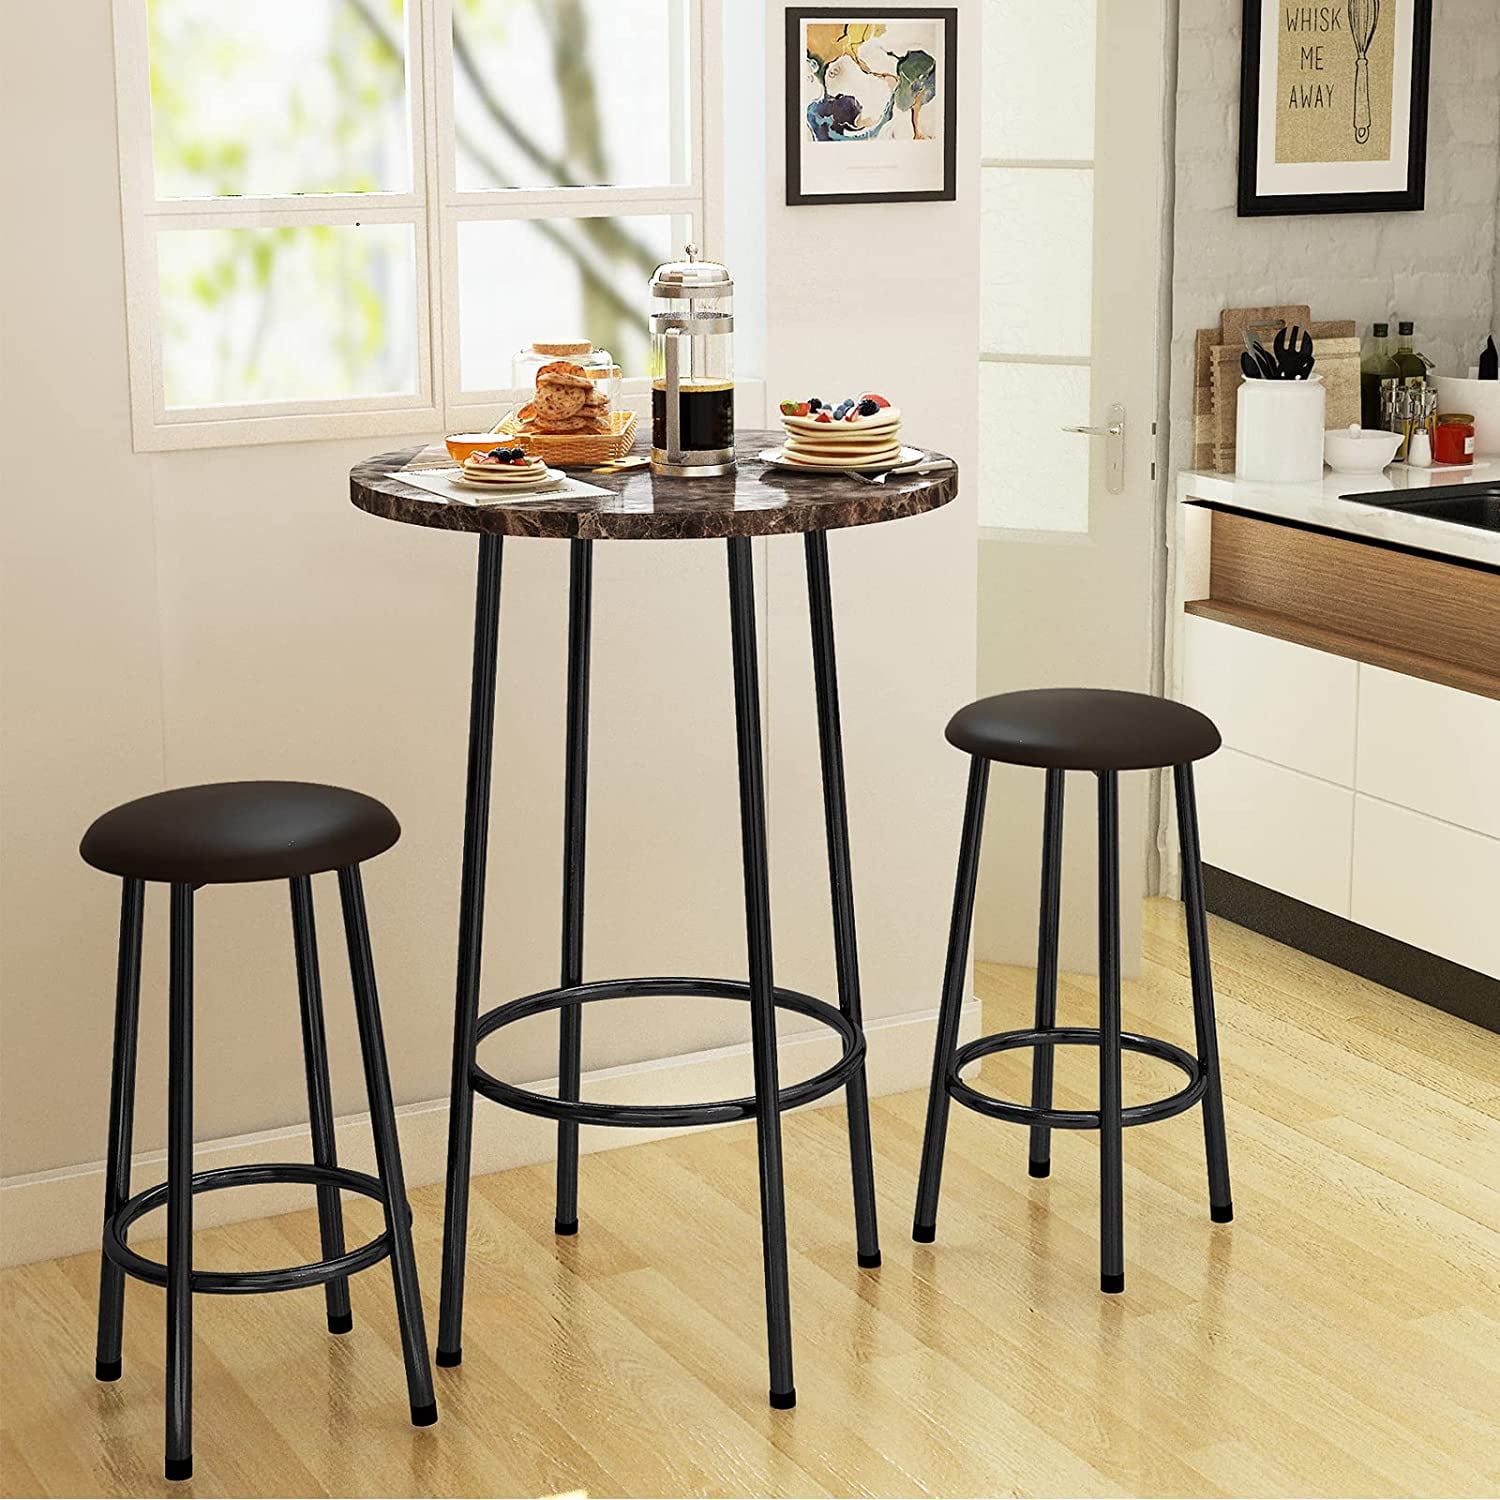 3 Pieces Bar Table Stools Set Adjutable Wood Top Swivel Dining Chair Pub Kitchen 